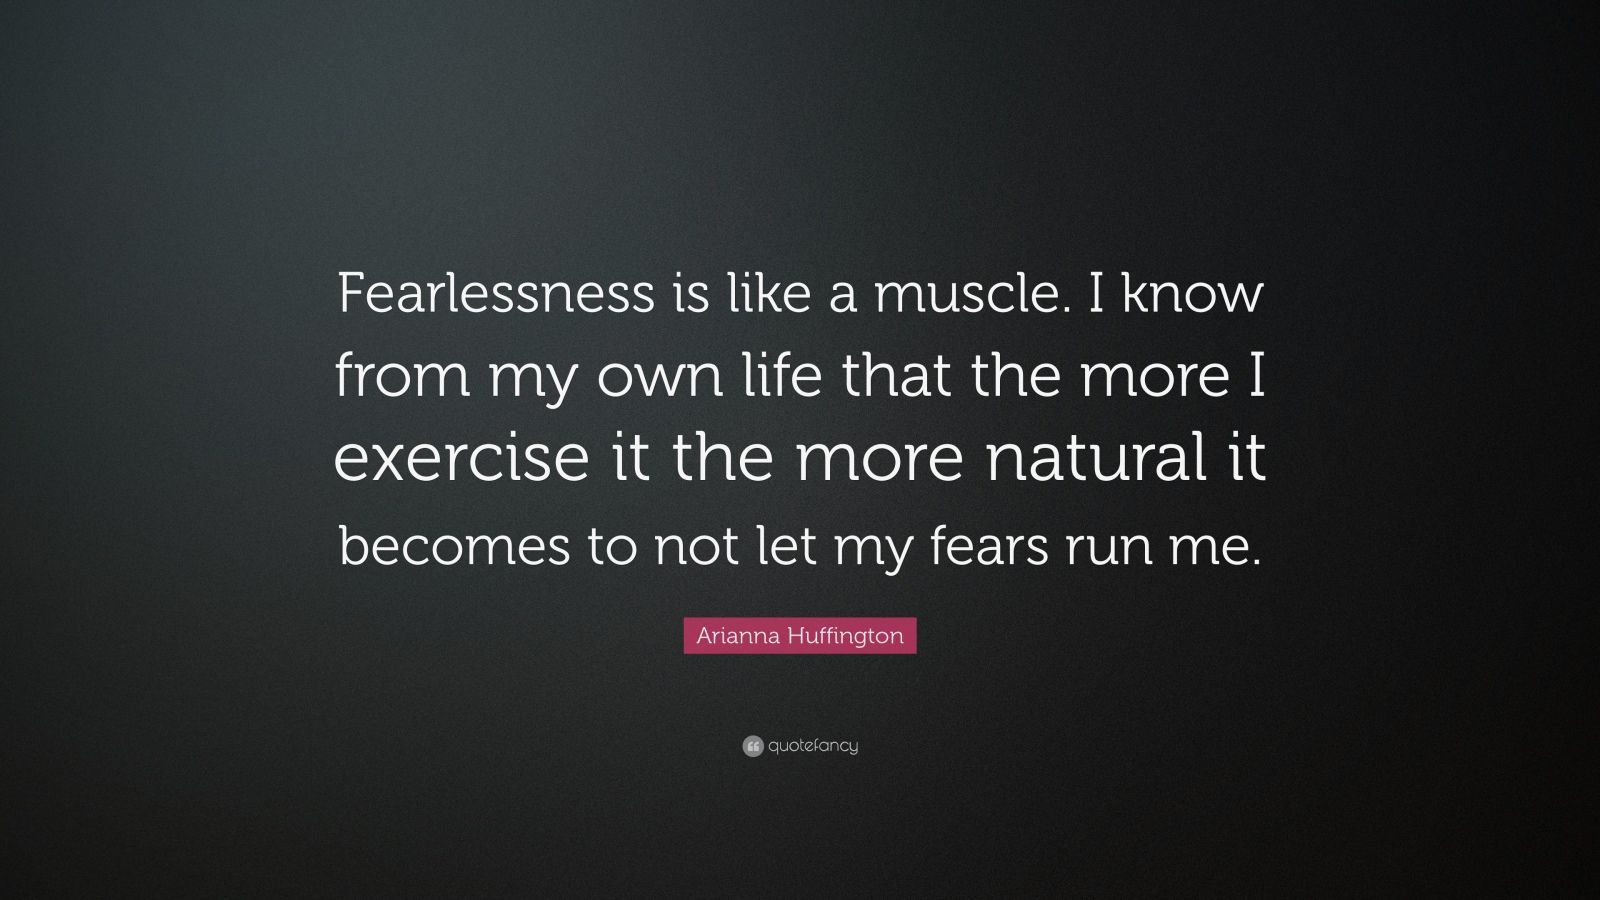 Courage Quotes “Fearlessness is like a muscle I know from my own life